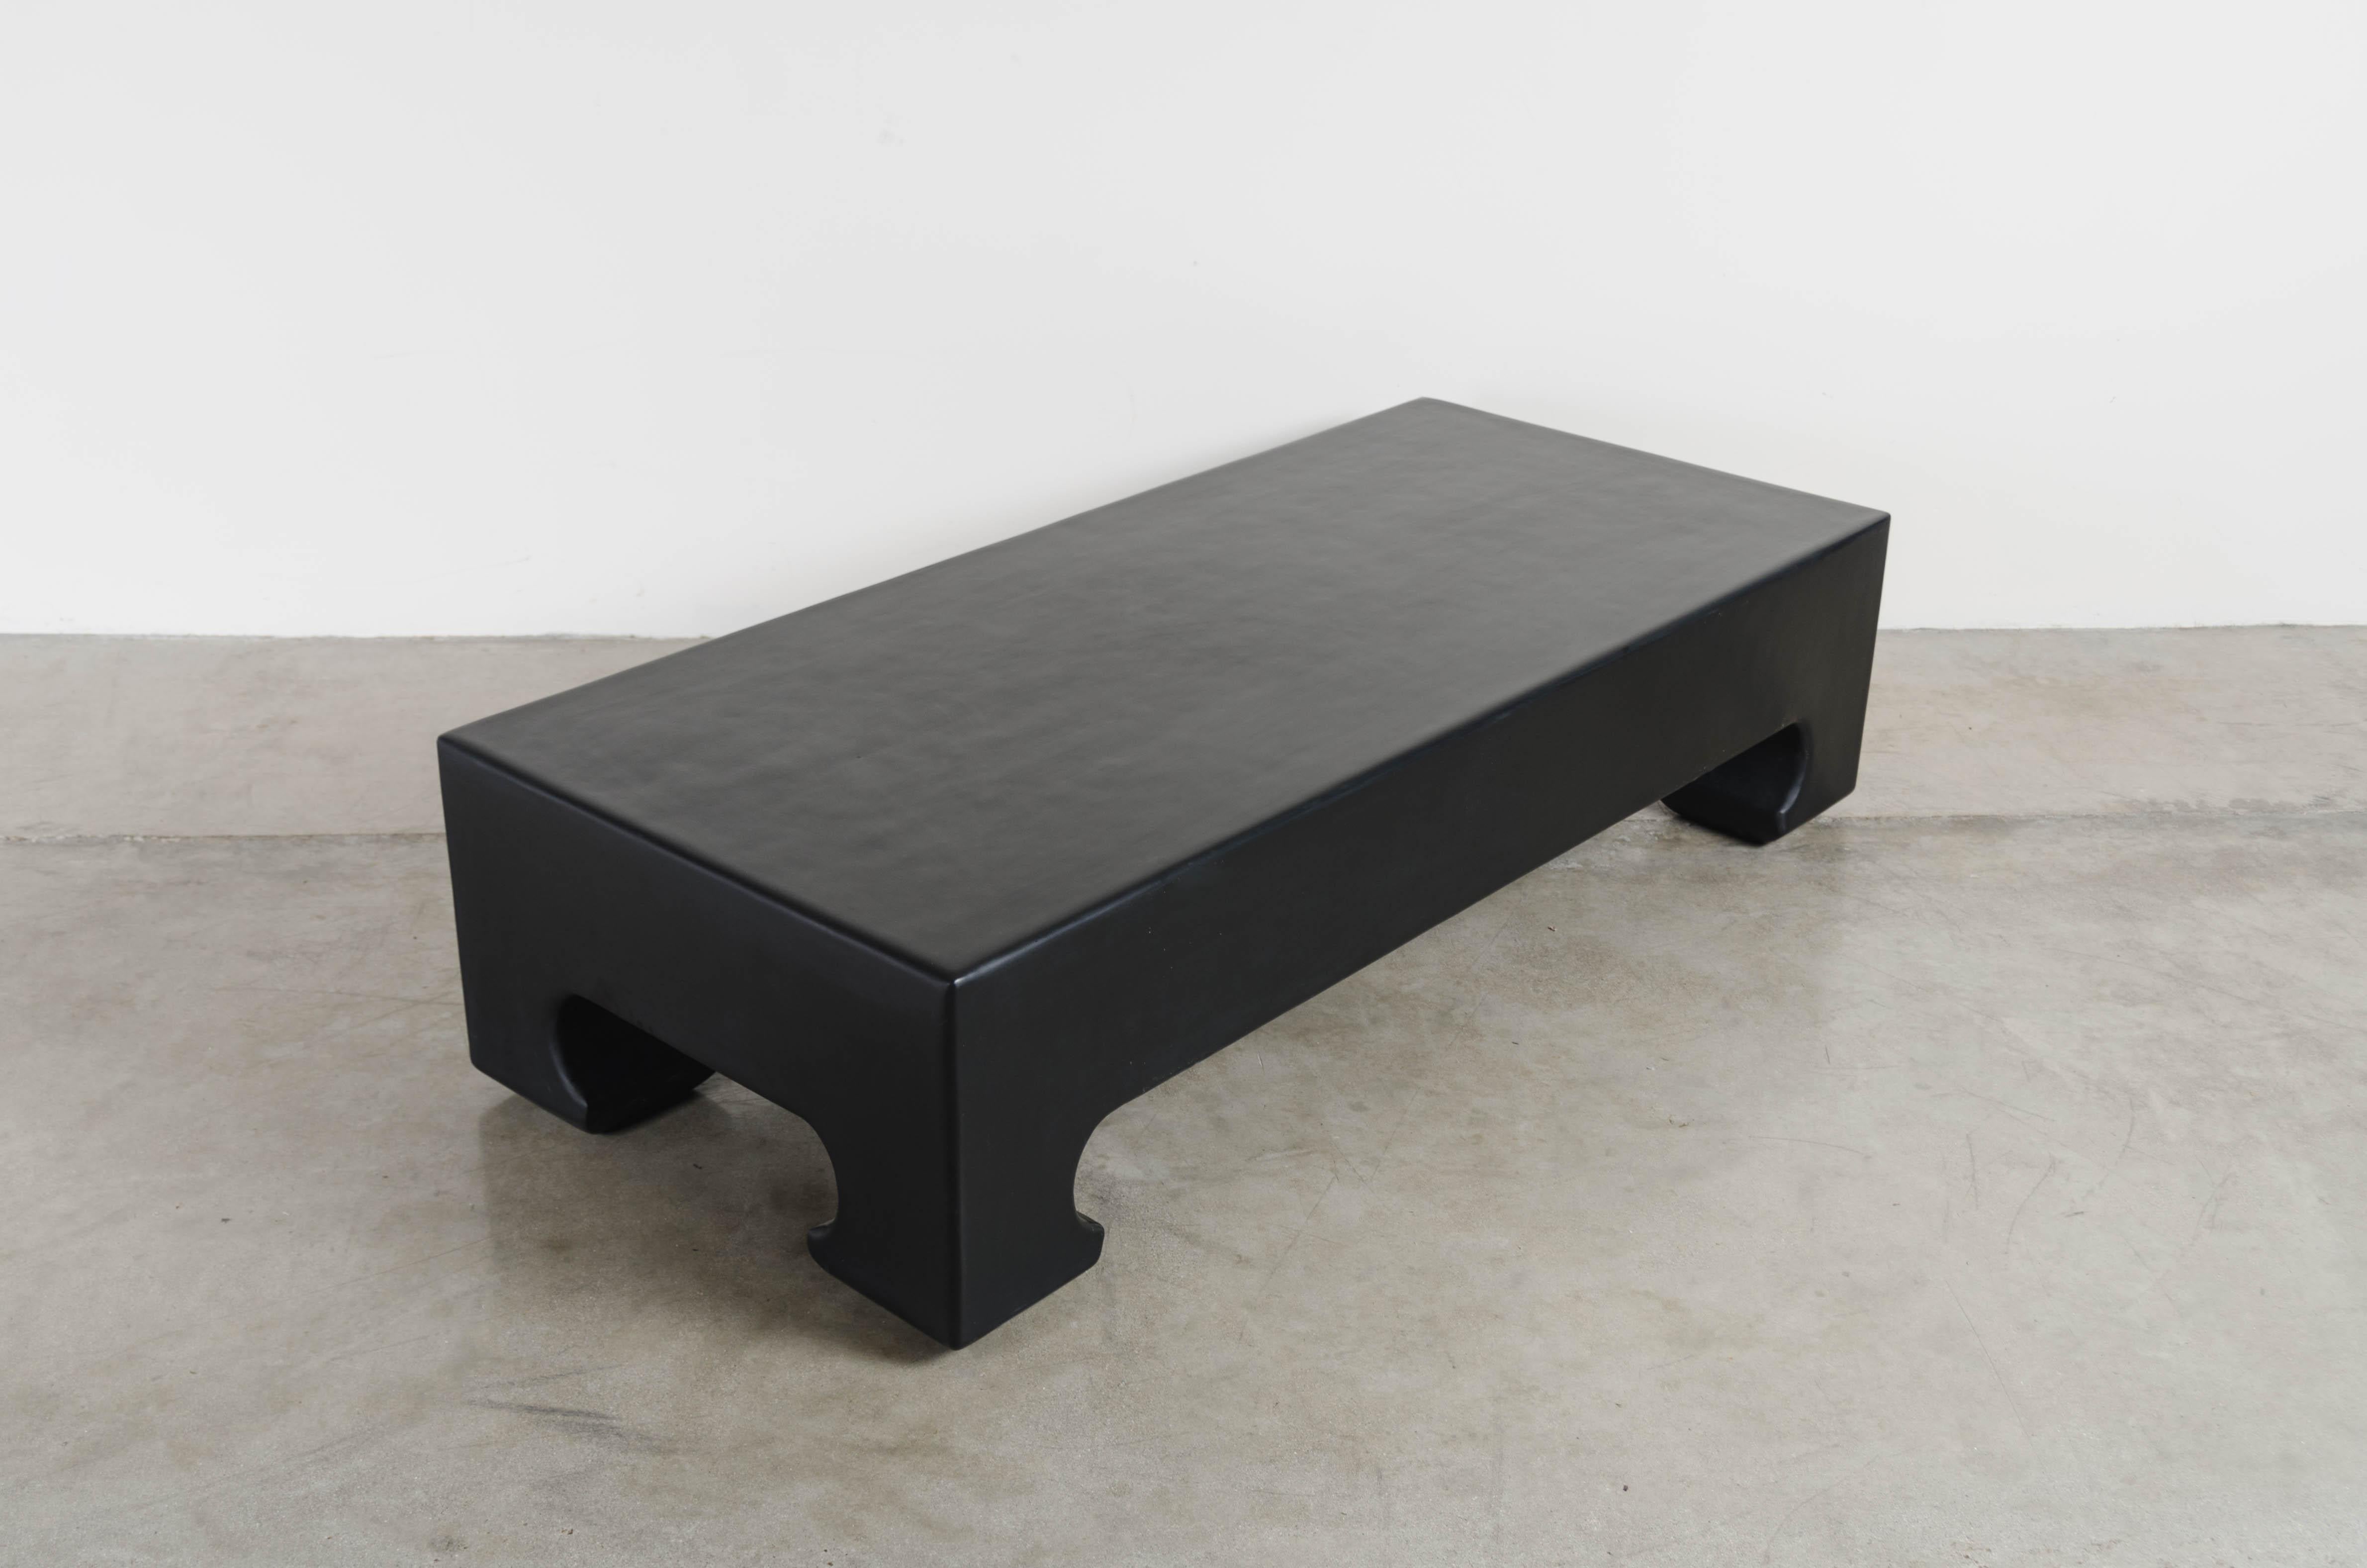 Contemporary Hoof Leg Coffee Table, Black Lacquer by Robert Kuo, Limited Edition